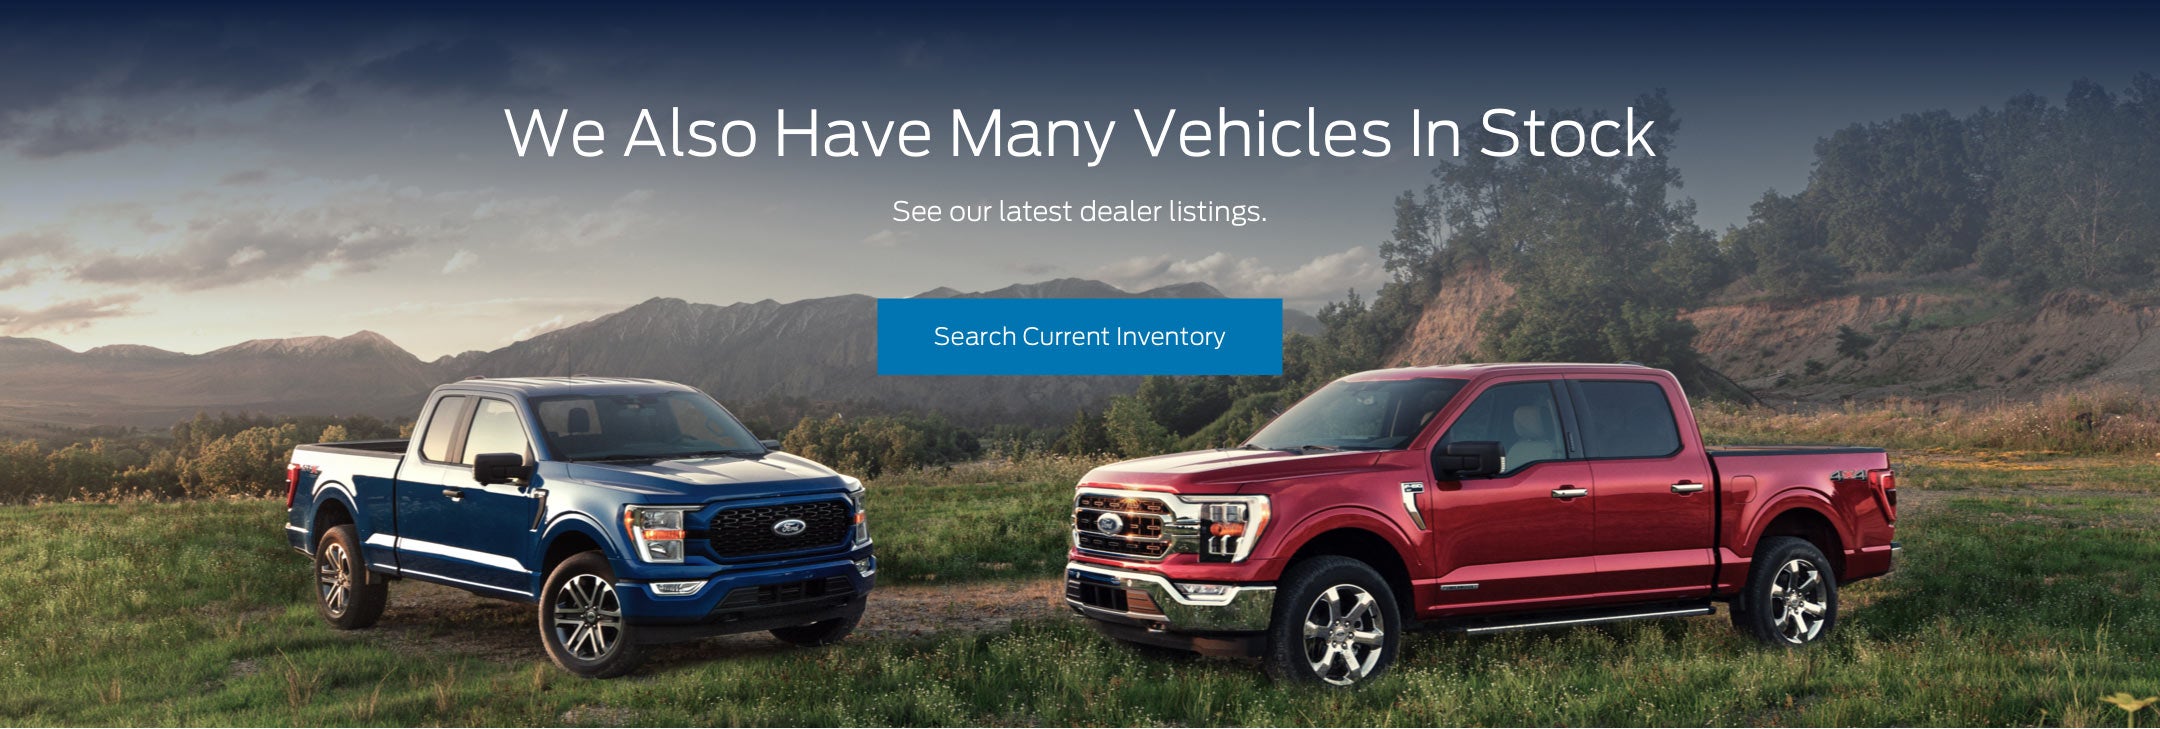 Ford vehicles in stock | Boyd Brothers Ford in Oxford NC